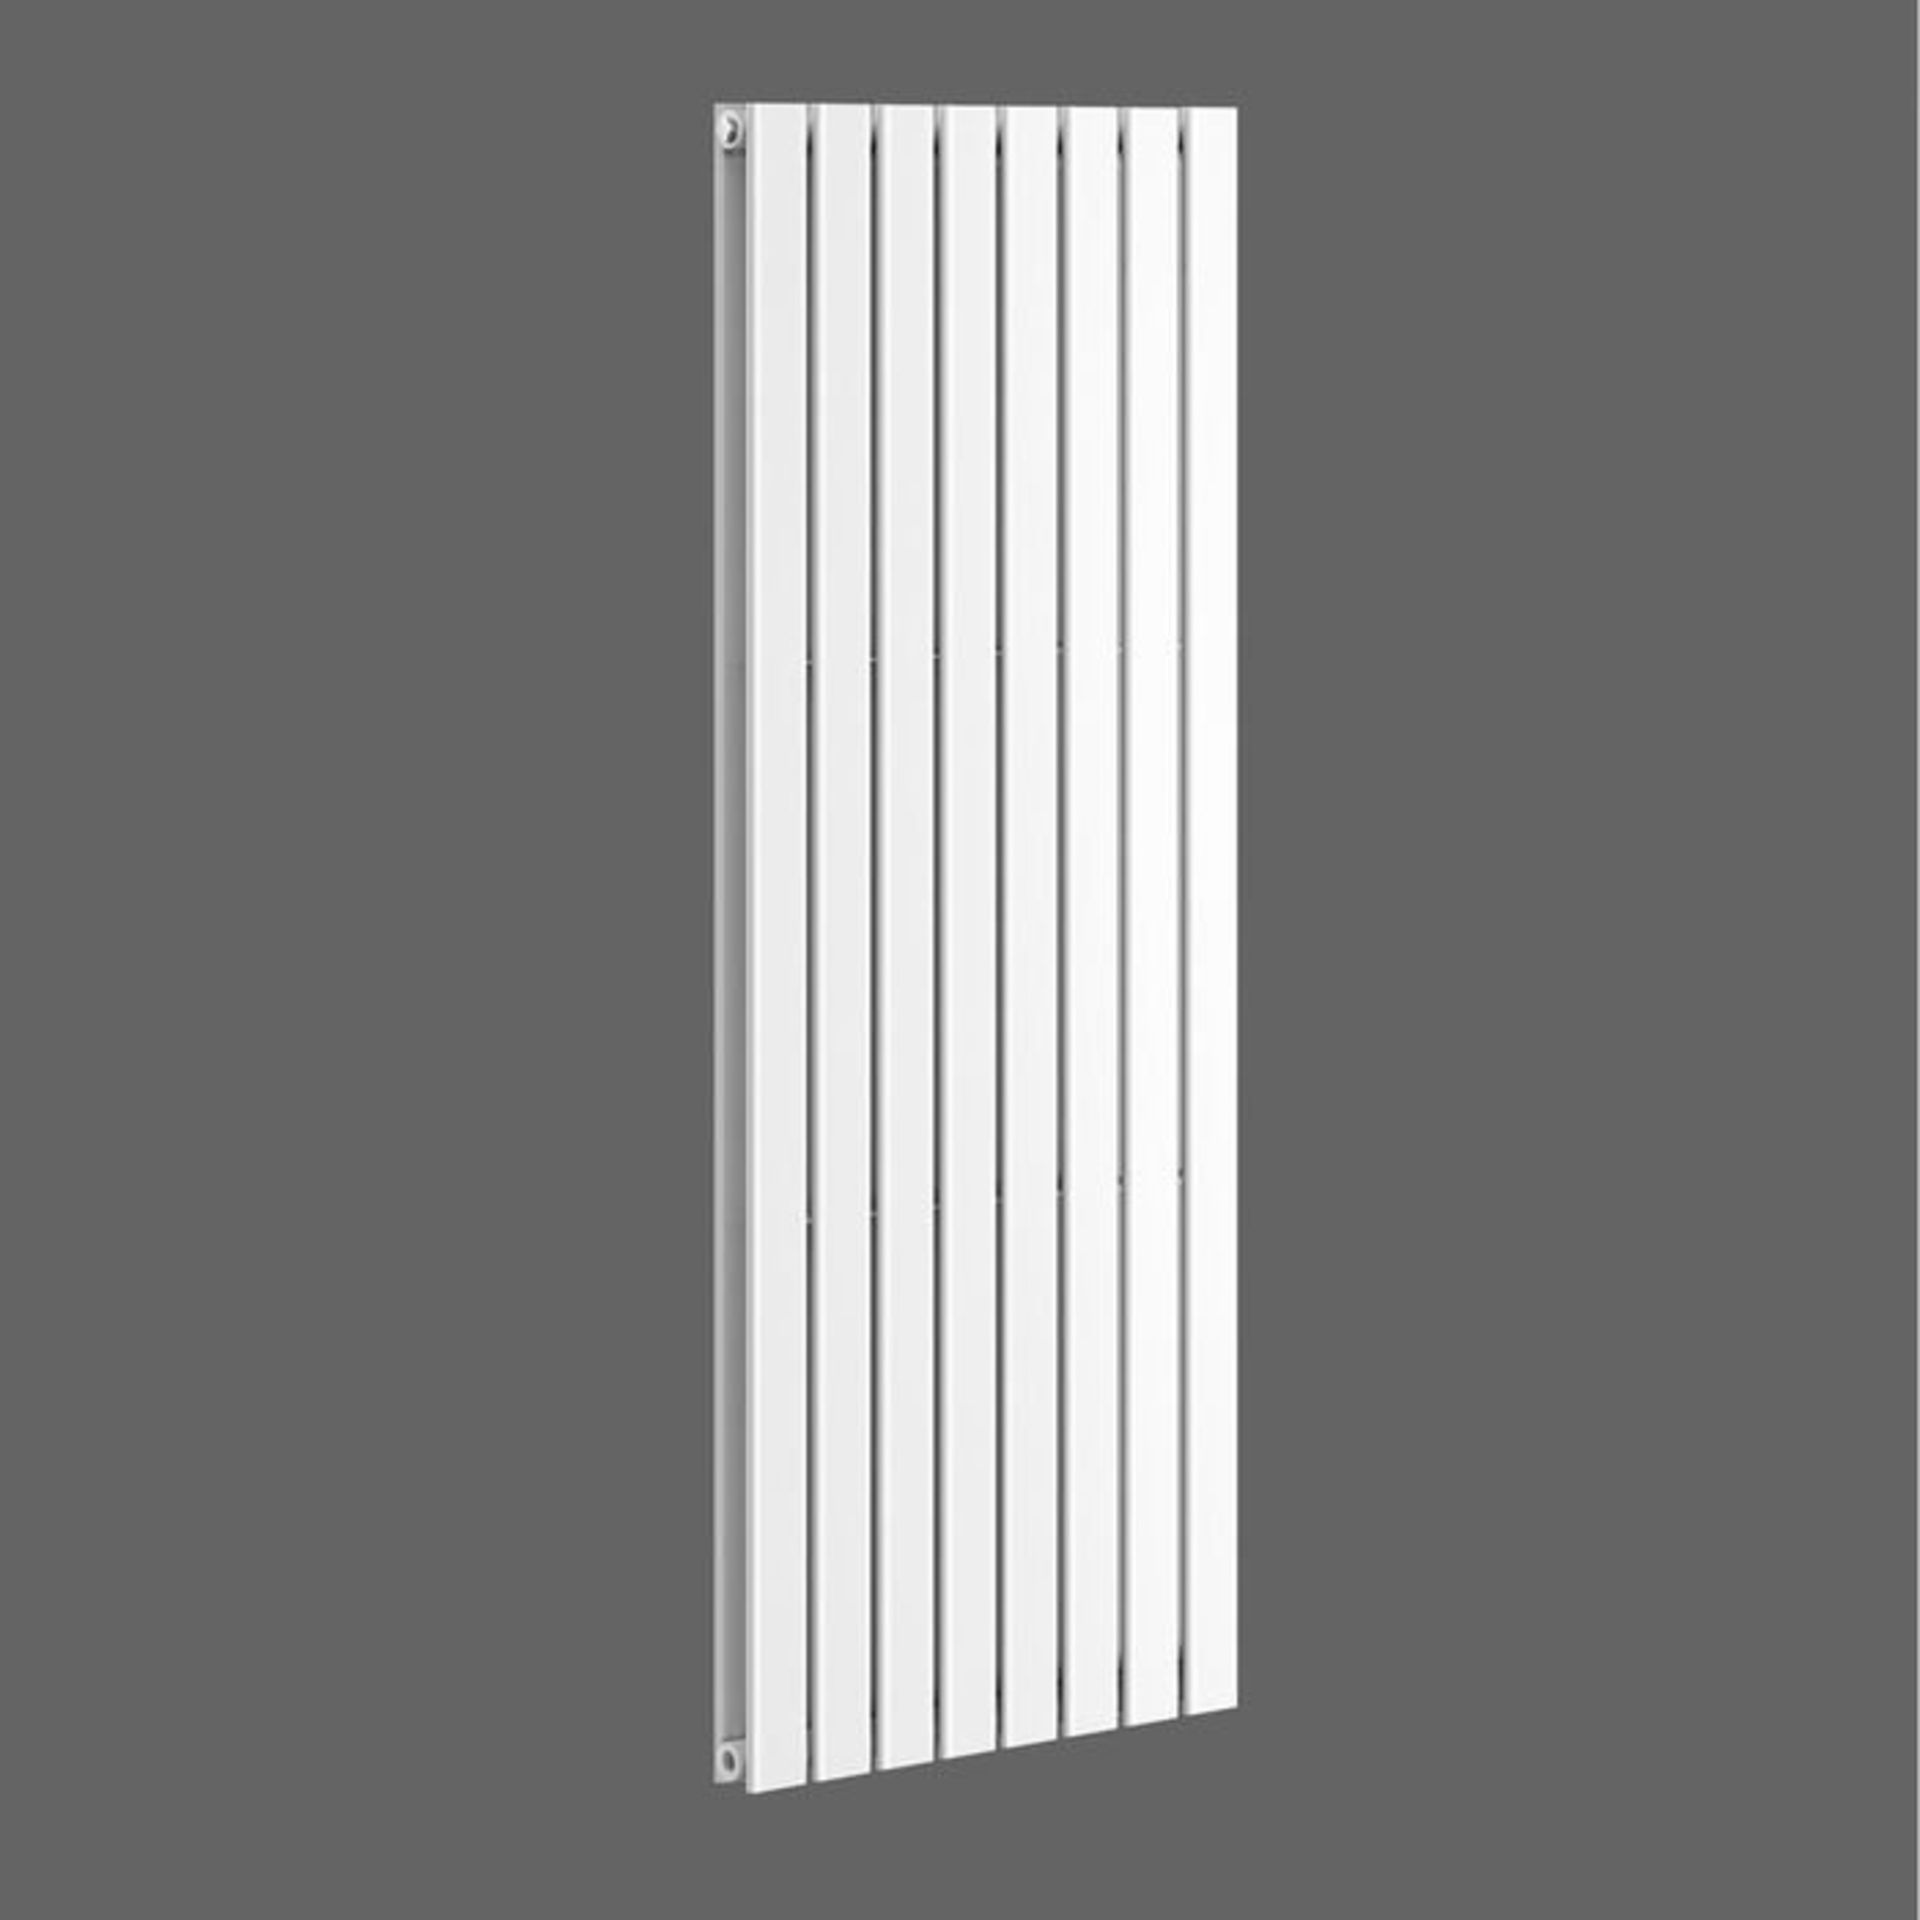 (L37) 1800x608mm Gloss White Double Flat Panel Vertical Radiator - Premium. RRP £599.99. Low - Image 4 of 4